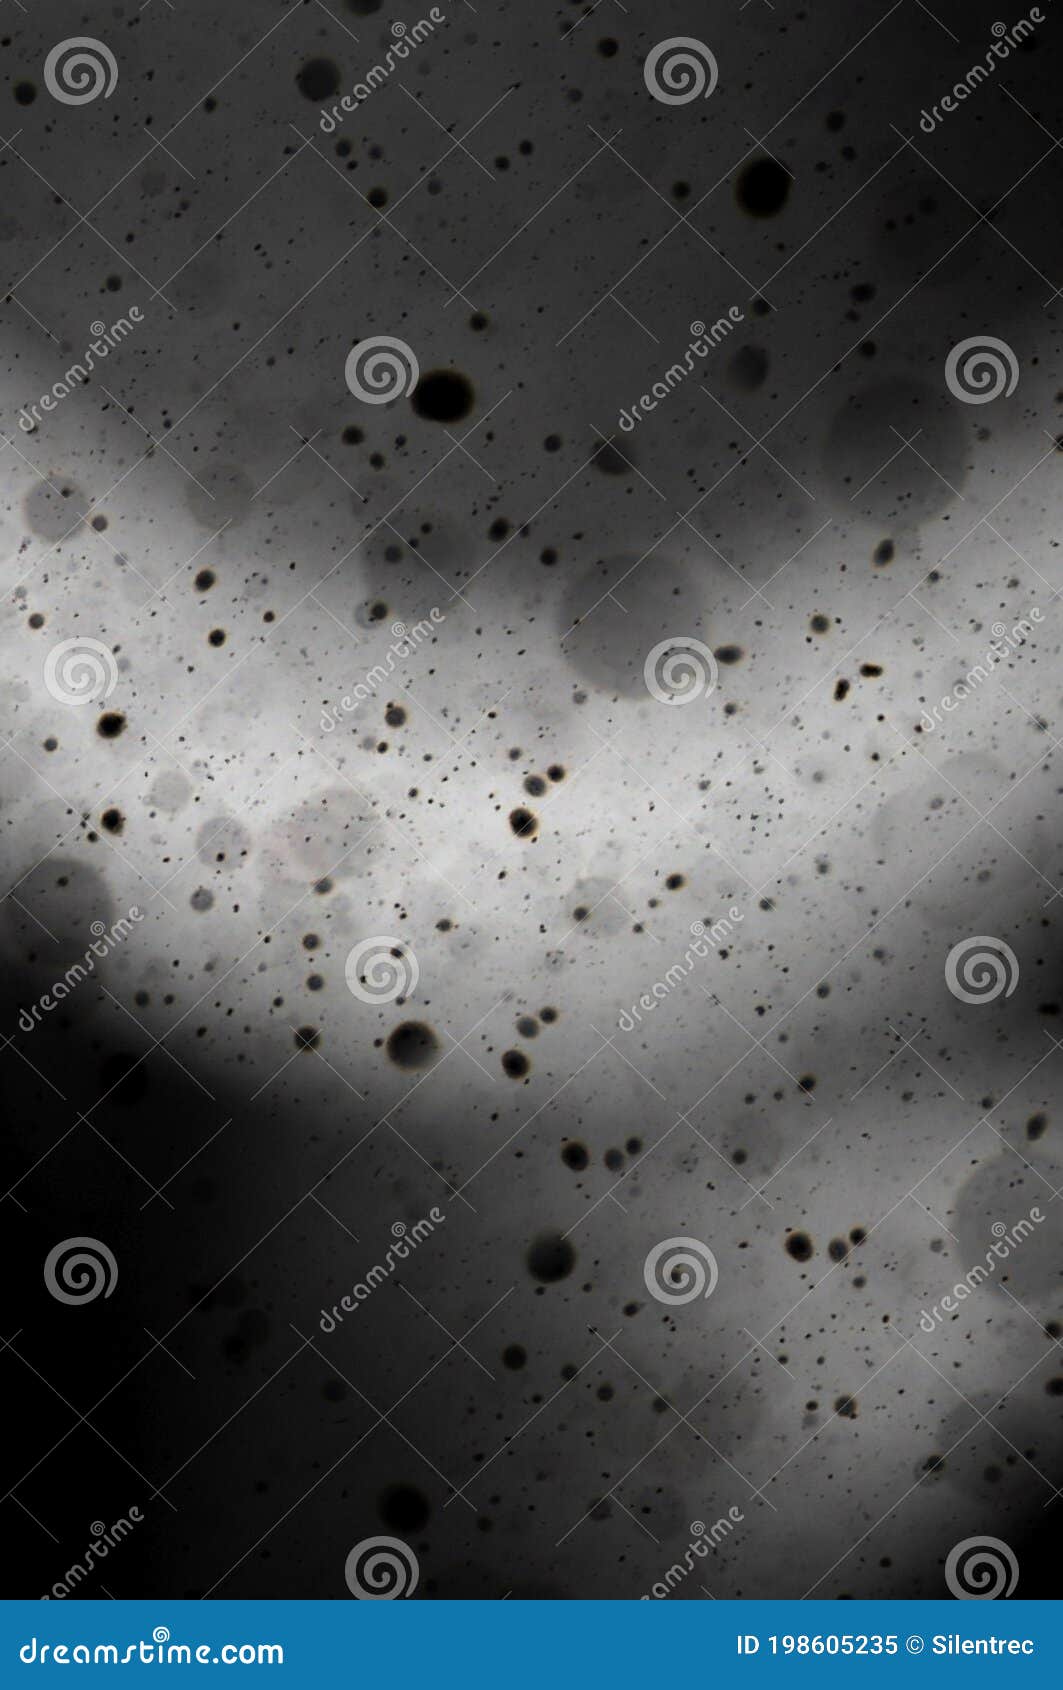 black and white dirty background, with a bright graphic 